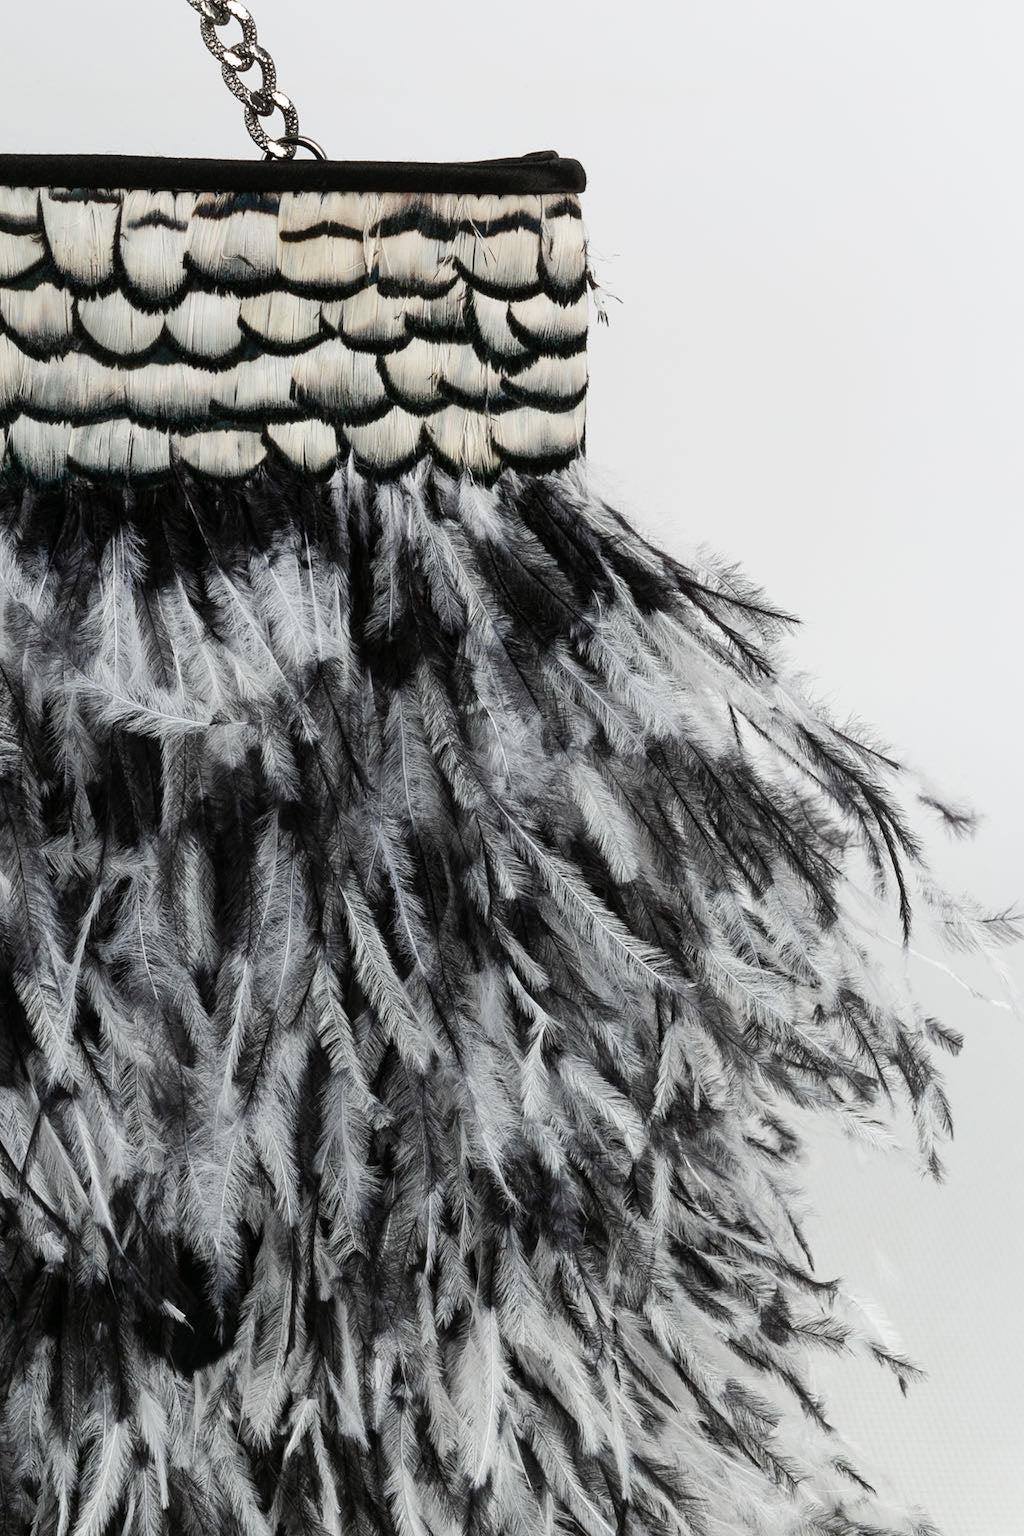 Chanel Clutch Silk Bag in Black and White Feathers, 2011 For Sale 5